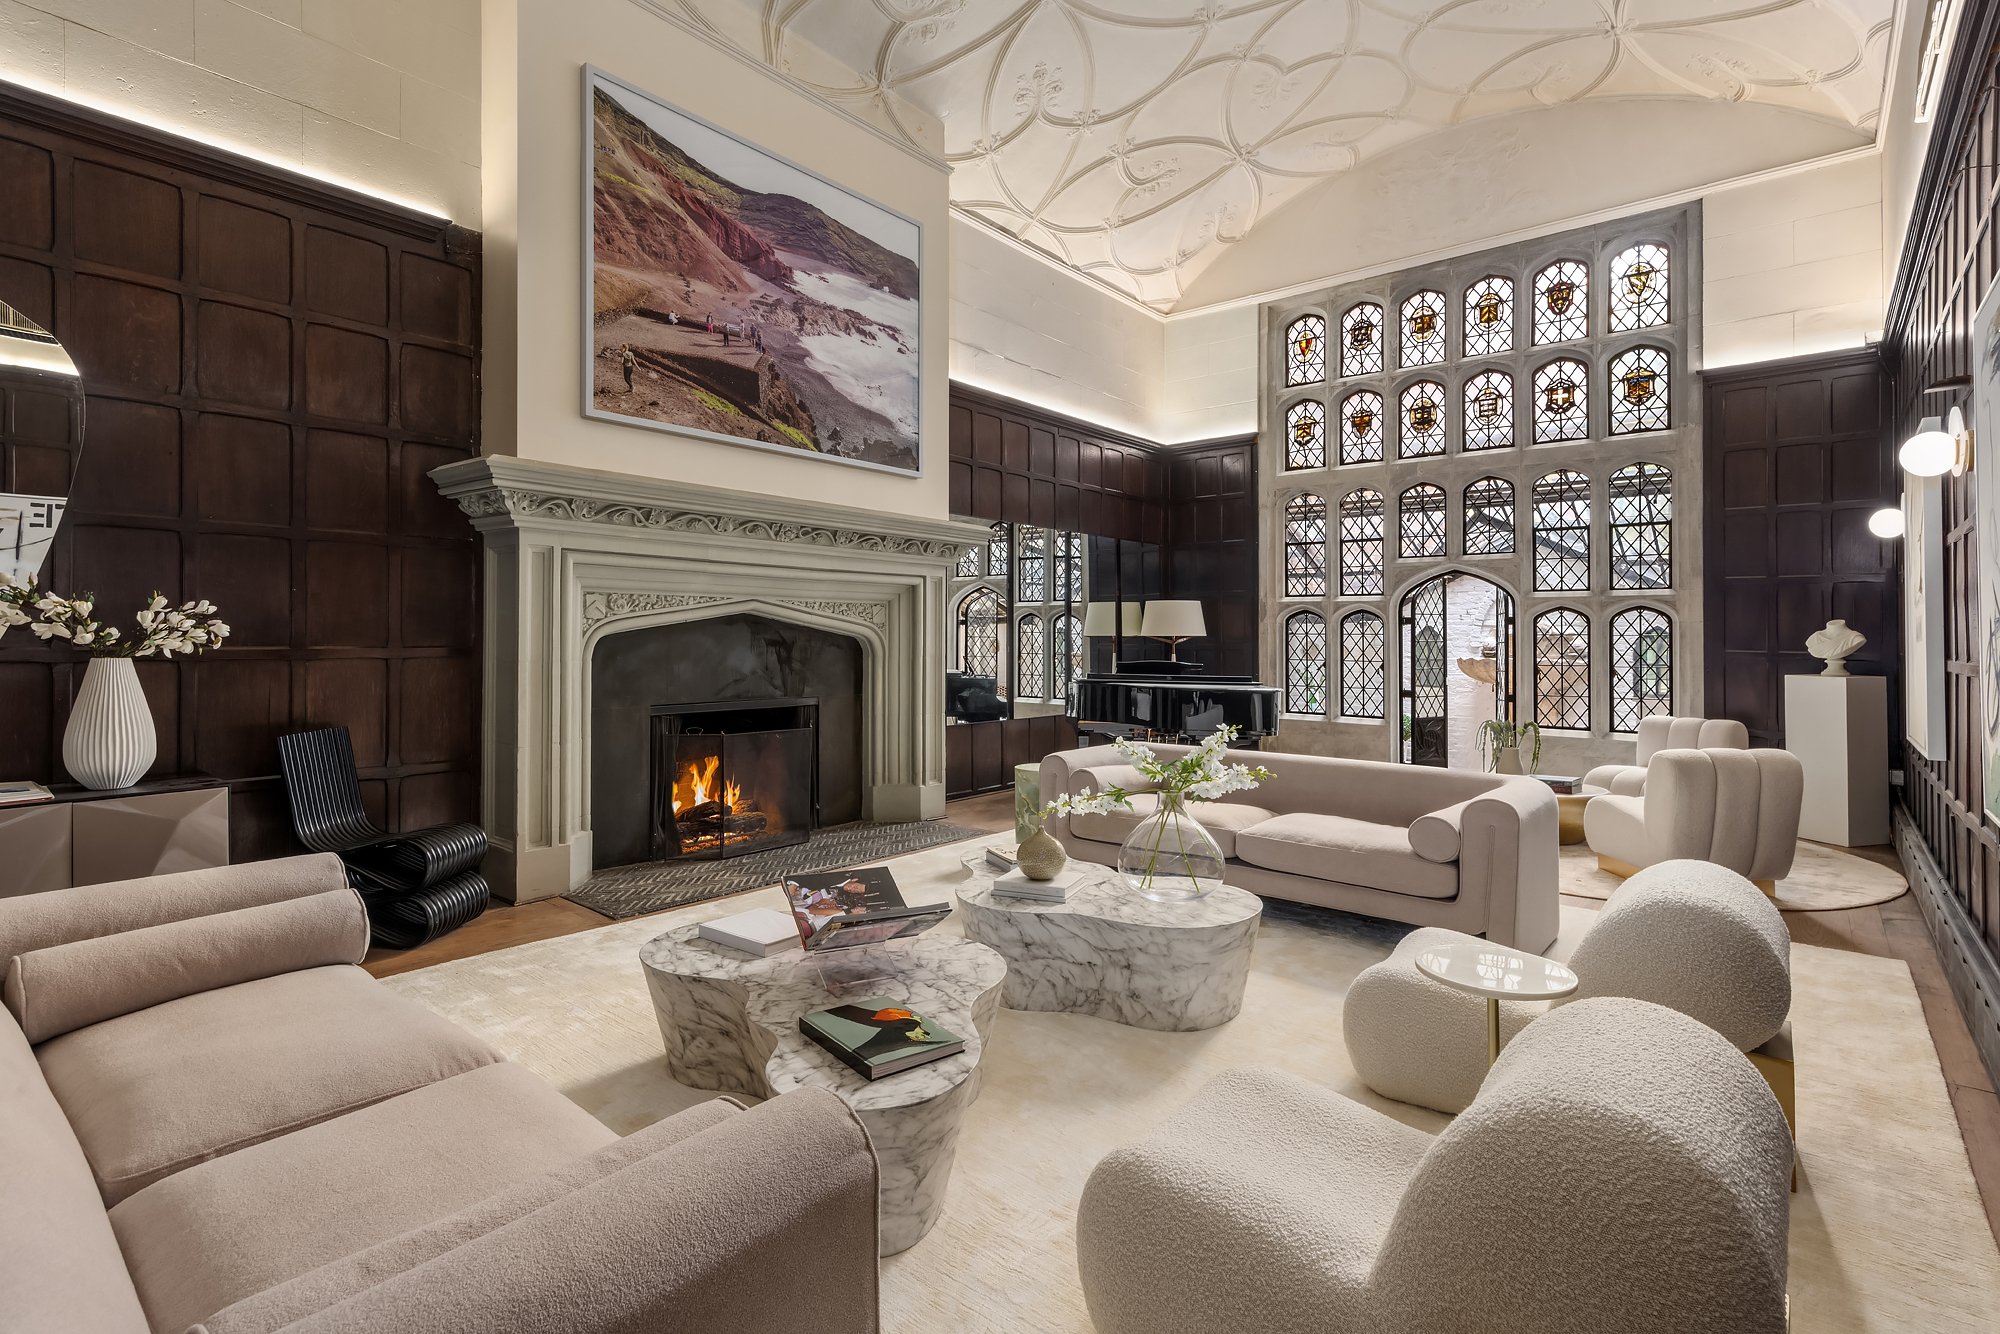 Francis York  “Best on the Block” Gothic Townhouse in Gramercy Park, New York City  00010.jpg